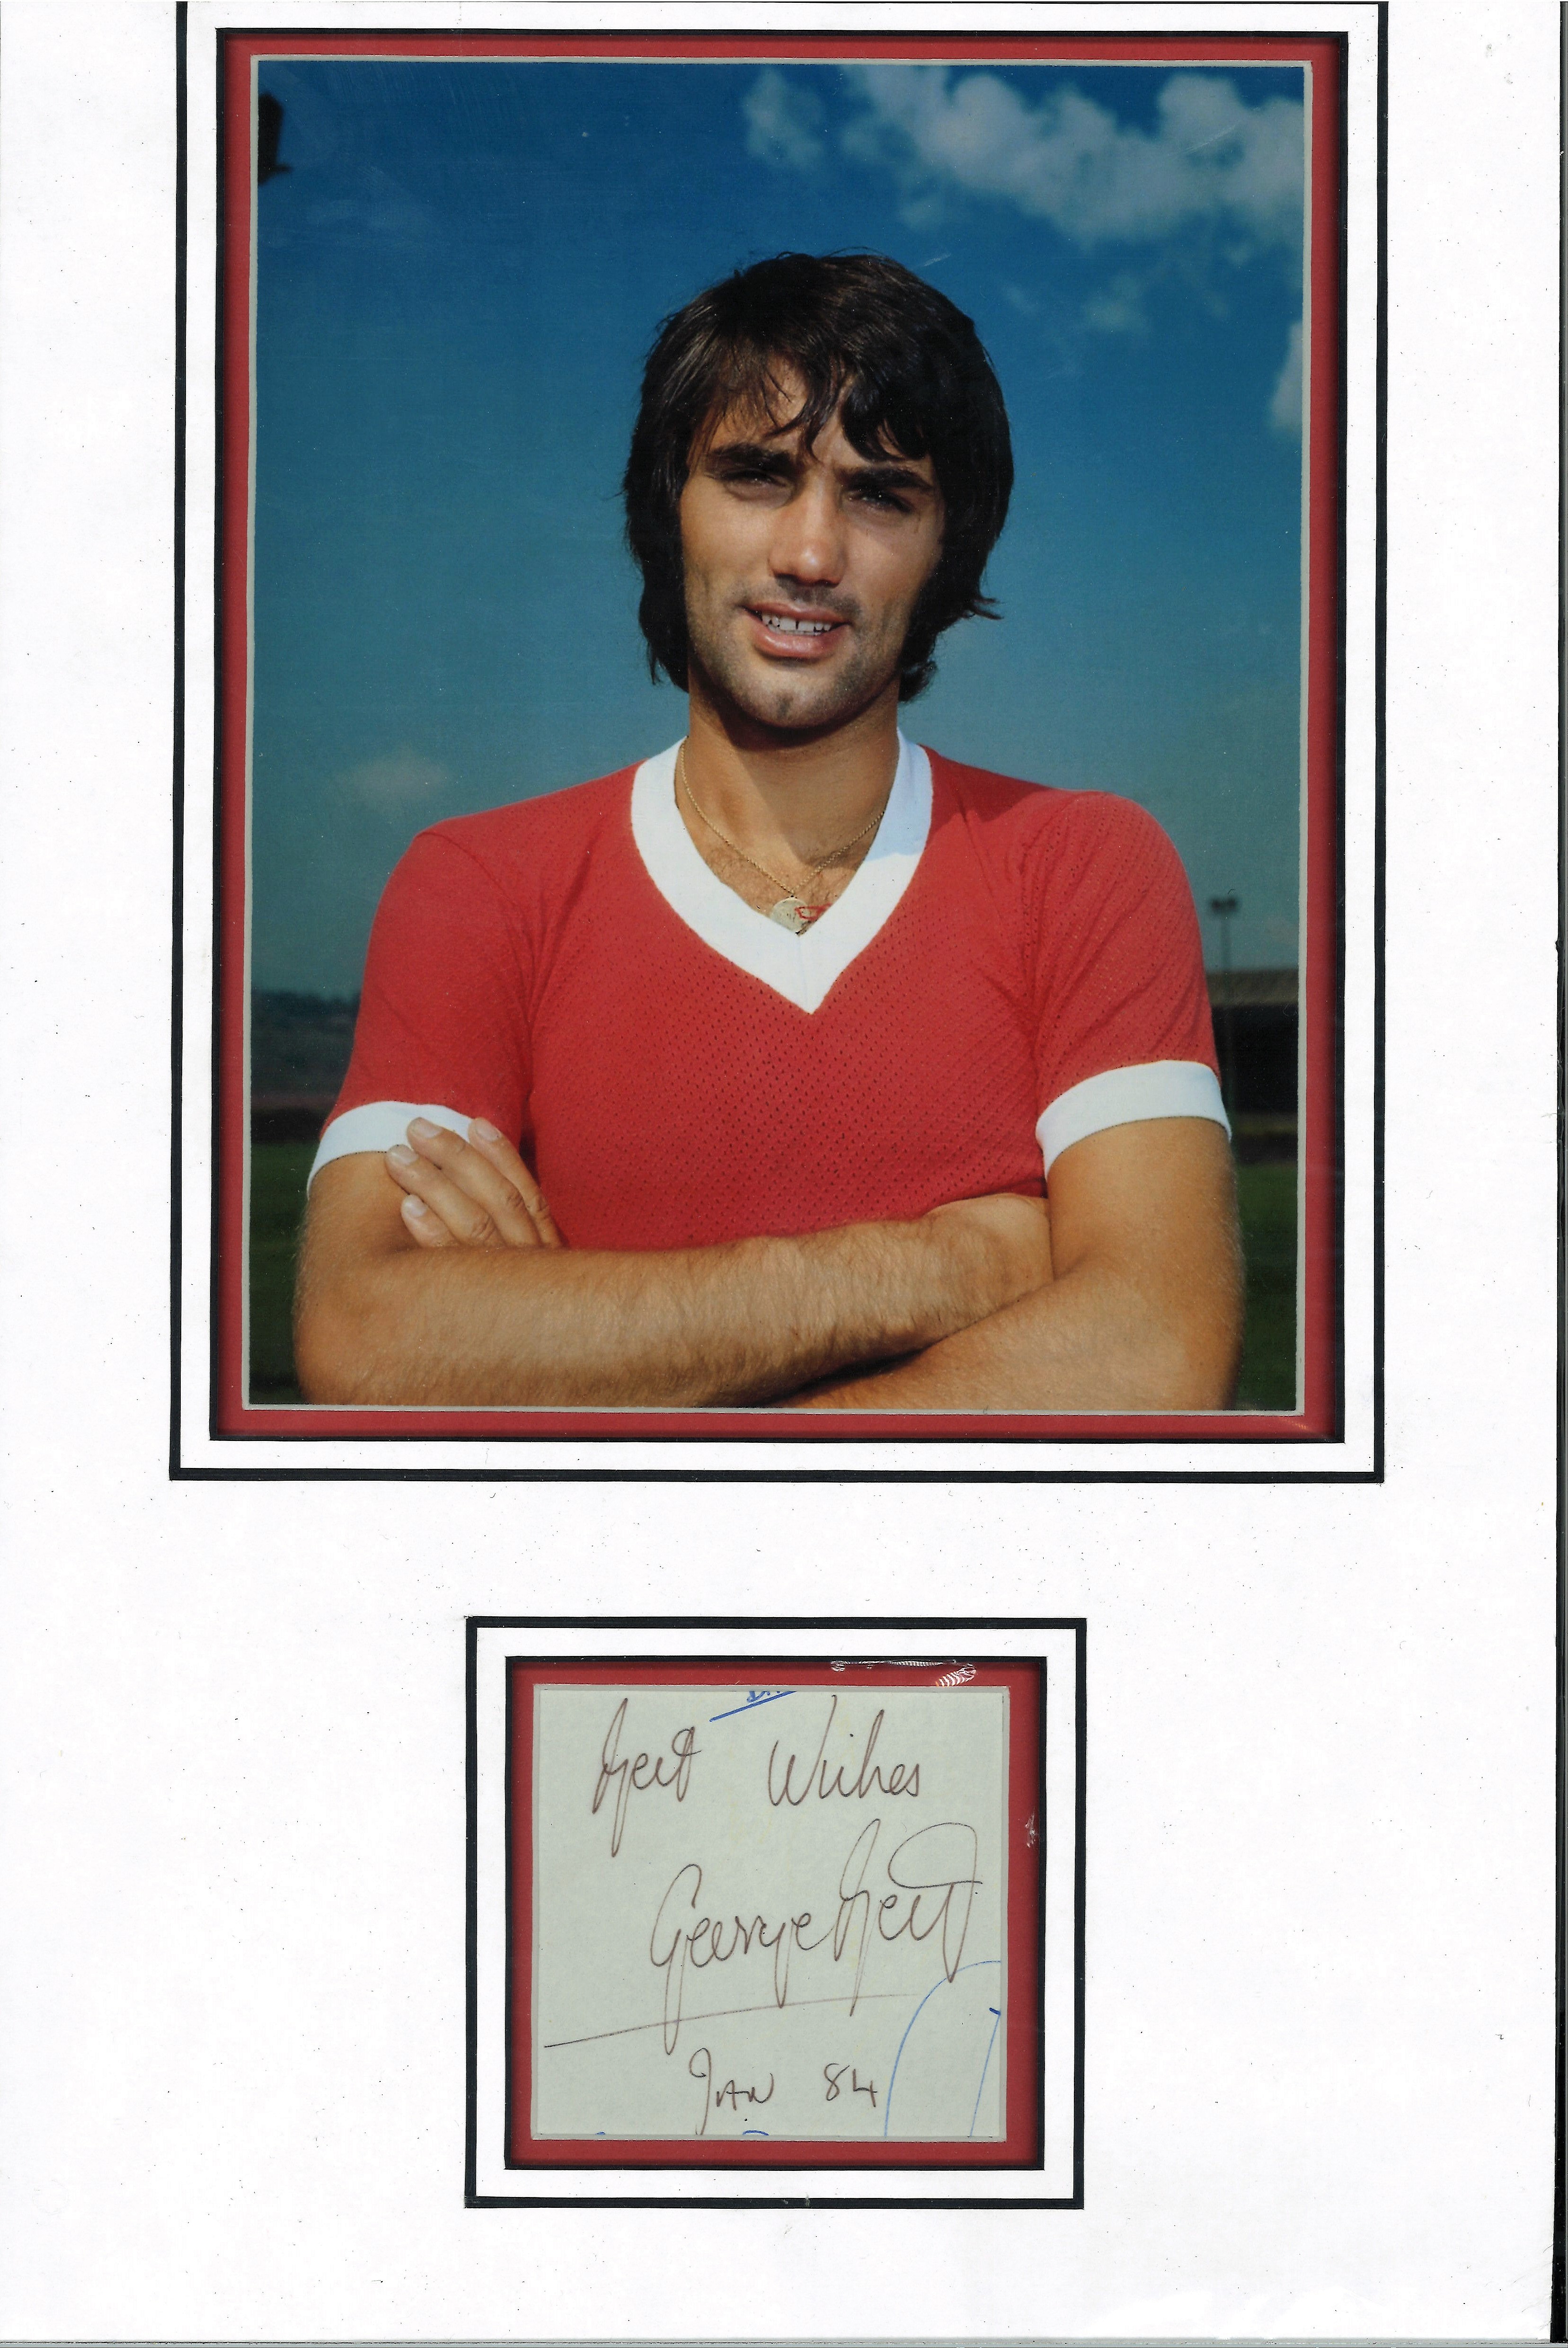 George Best signed autograph presentation. High quality professionally mounted 18 x 11 inch